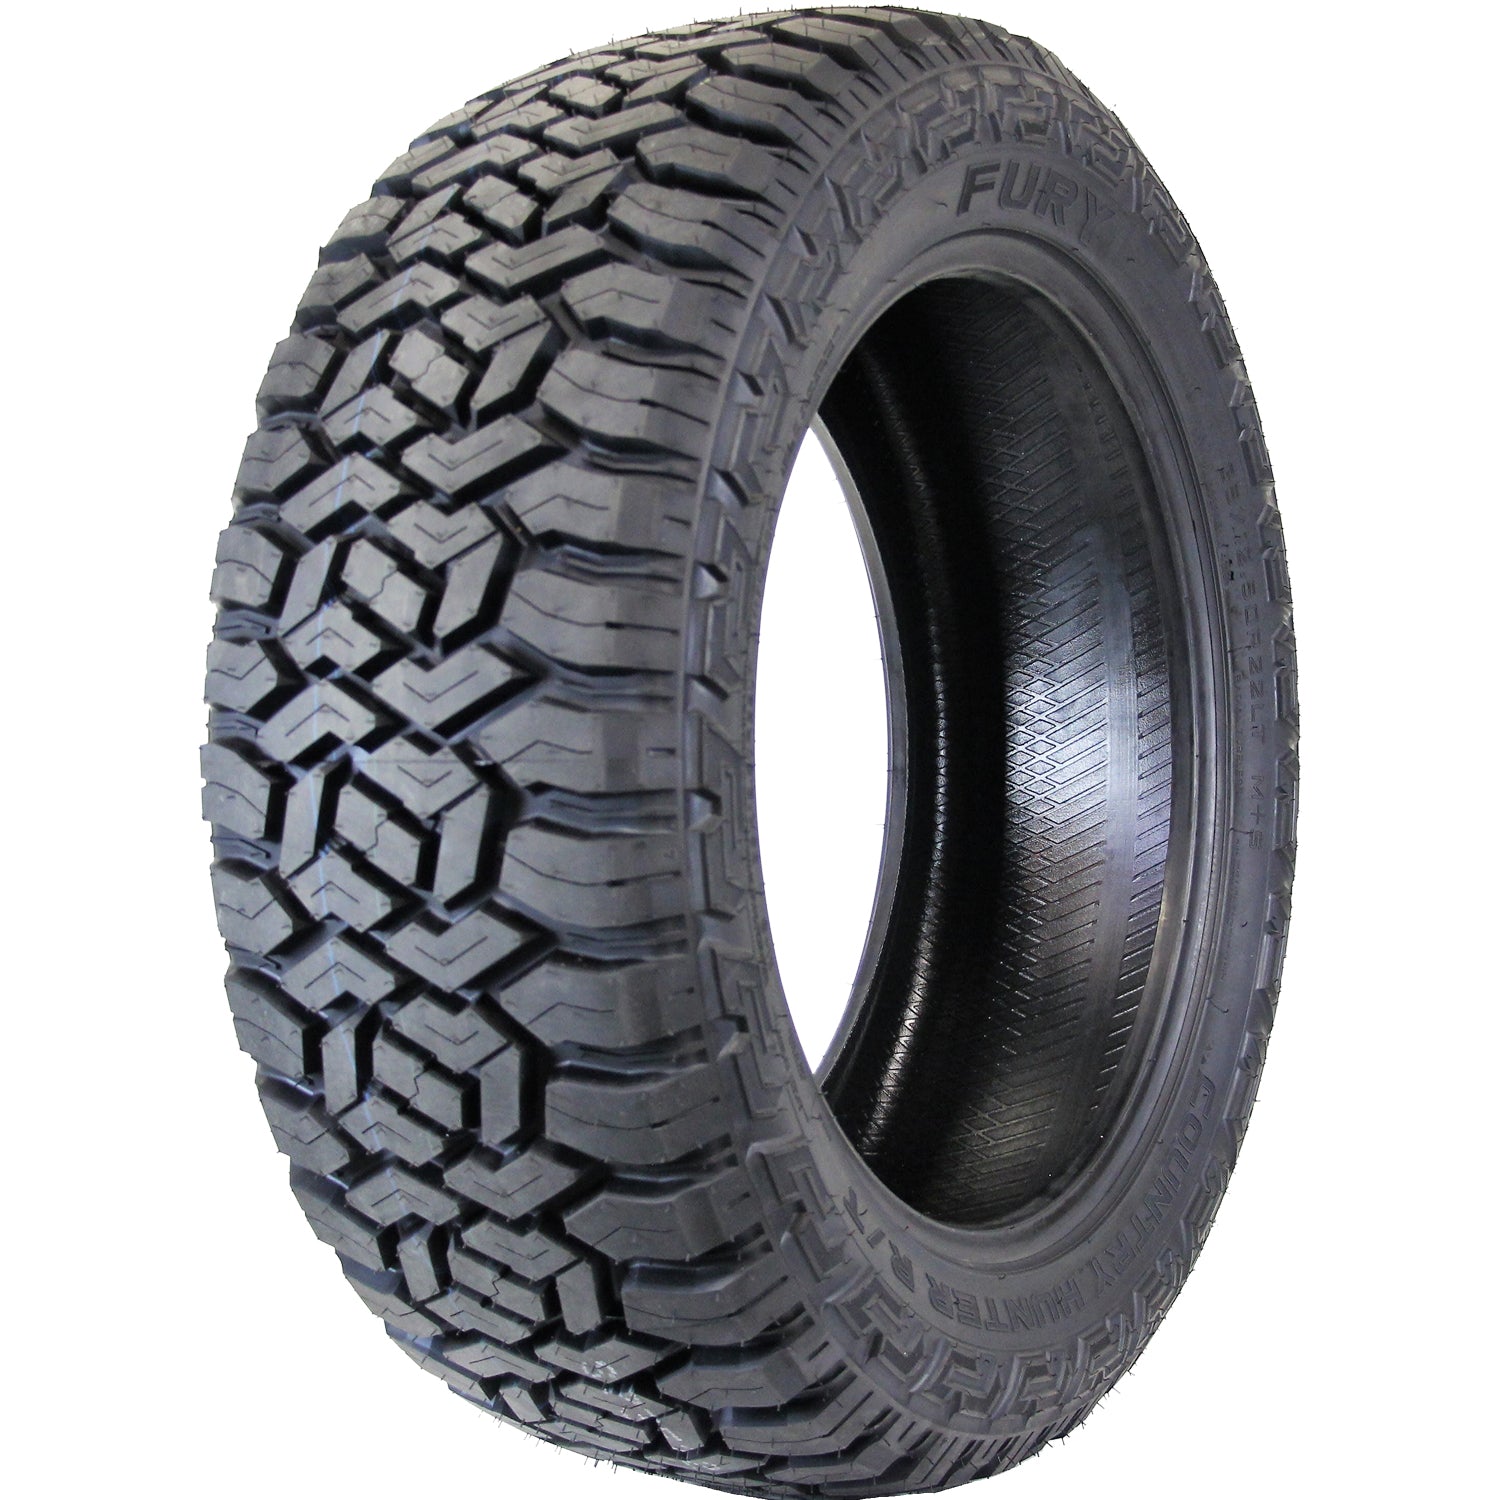 FURY OFFROAD COUNTRY HUNTER RT LT305/55R20 (33.5X12.5R 20) Tires